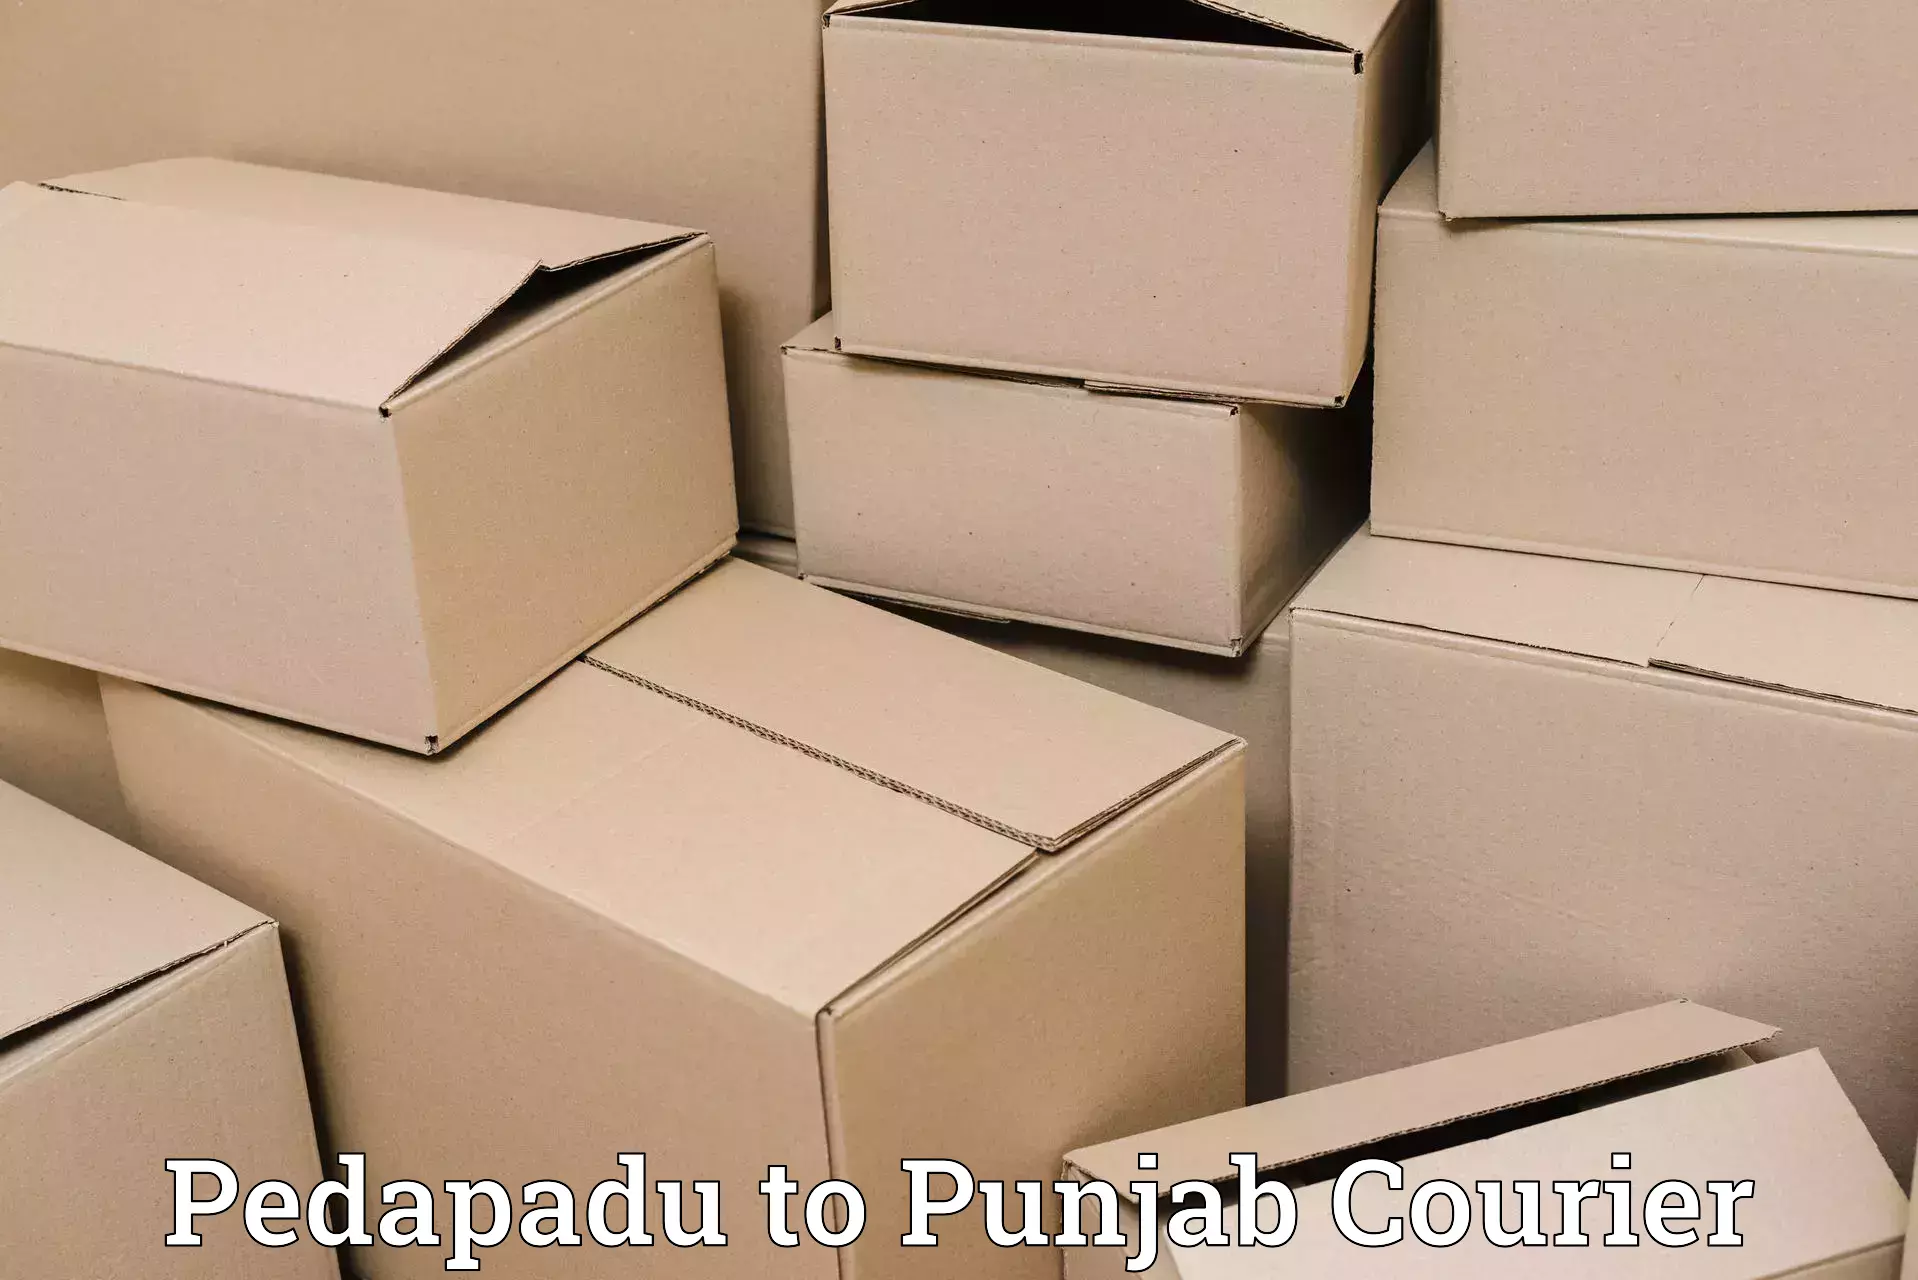 Cargo delivery service Pedapadu to Pathankot